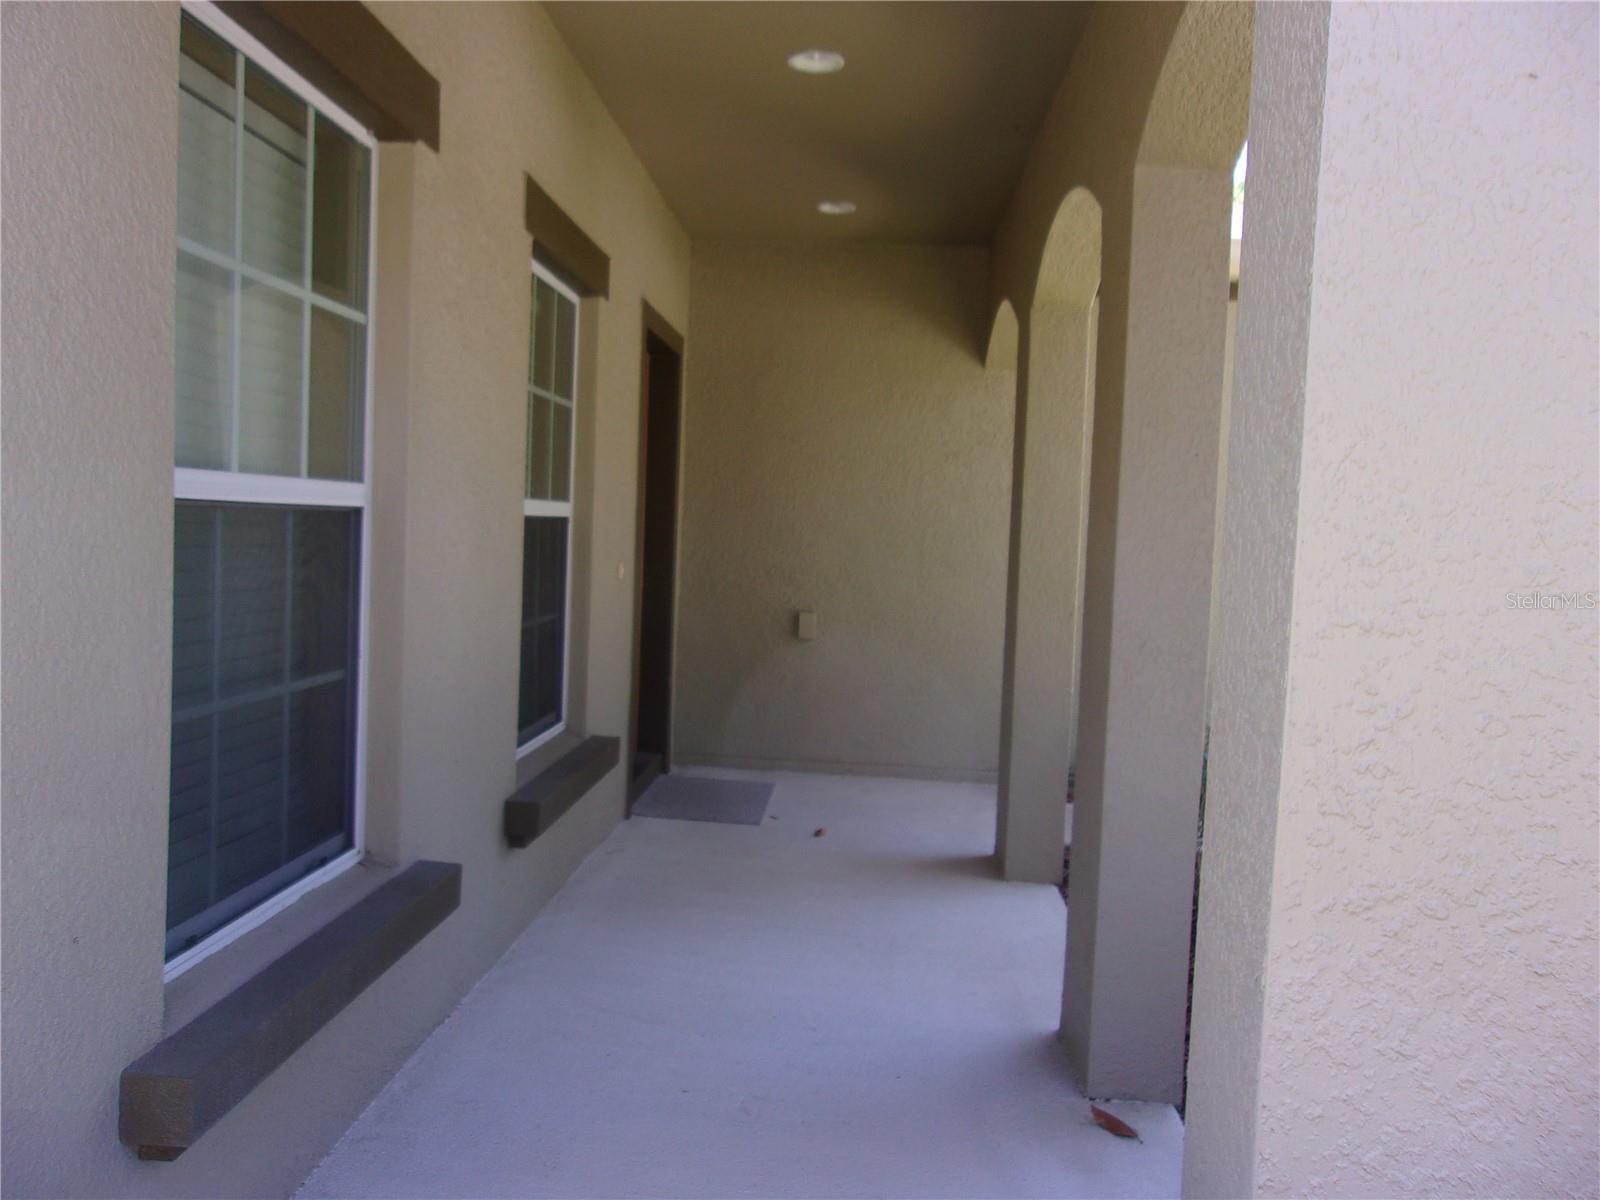 Covered Entry Porch